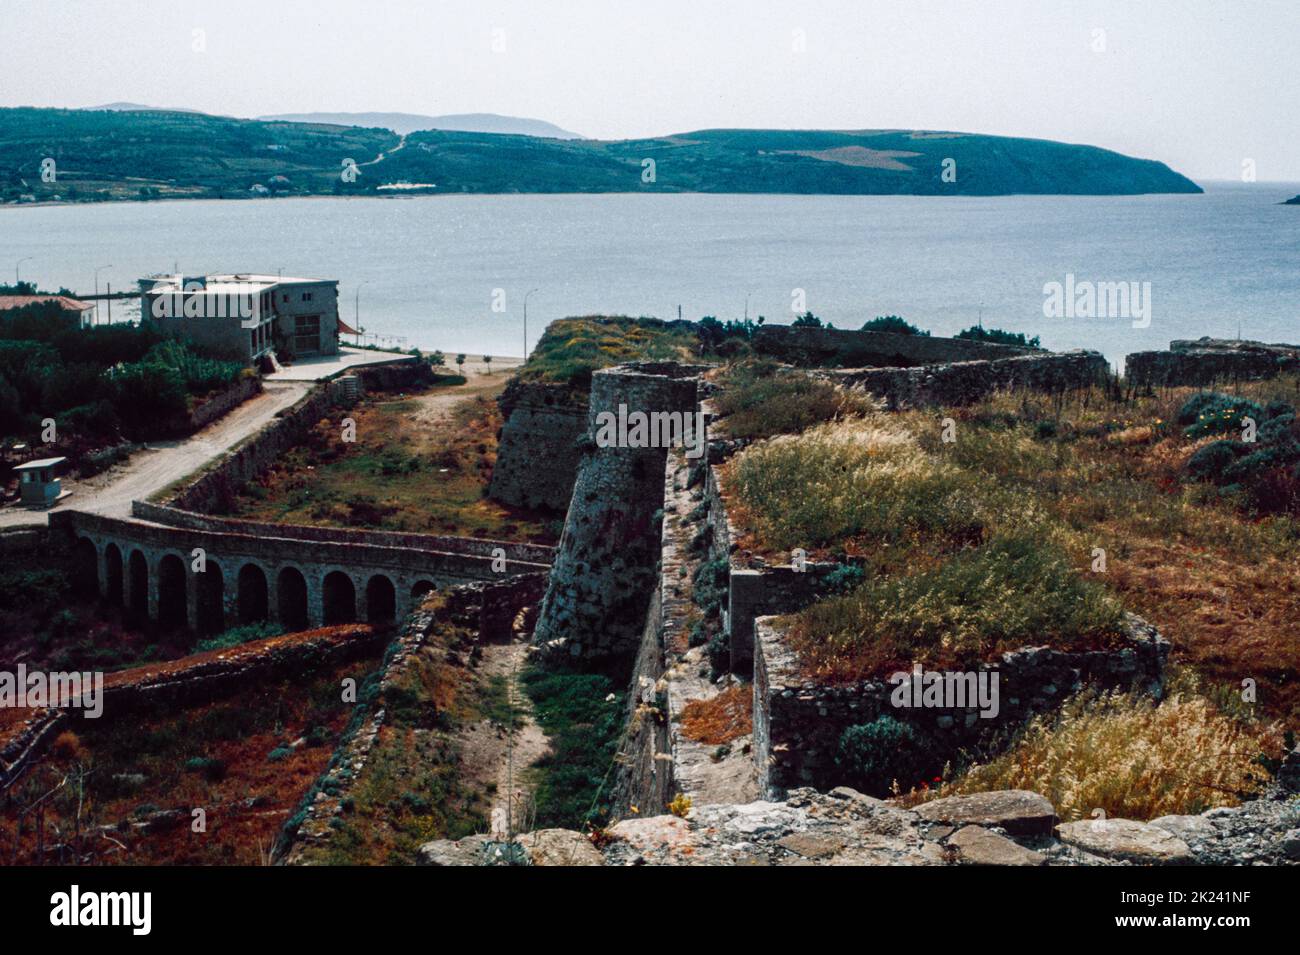 Castle of Methoni - a medieval fortification in the port town of Methoni (Messenia, Modon) - a village and a former municipality in Messenia, Peloponnese, Greece. April 1980. Archival scan from a slide. Stock Photo